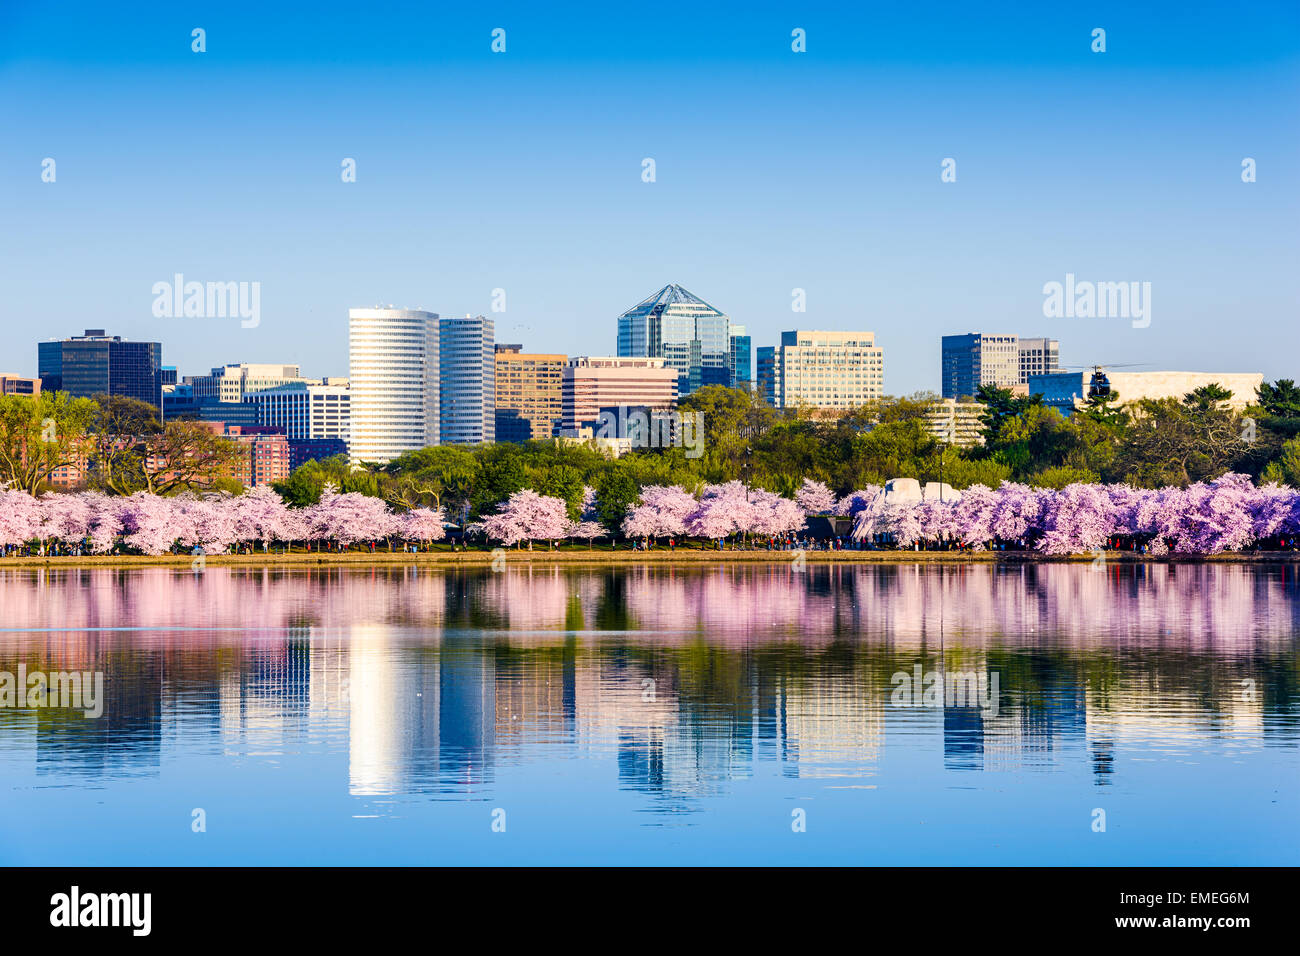 Washington, D.C. at the Tidal Basin during cherry blossom season with the Rosslyn business distict citycape. Stock Photo